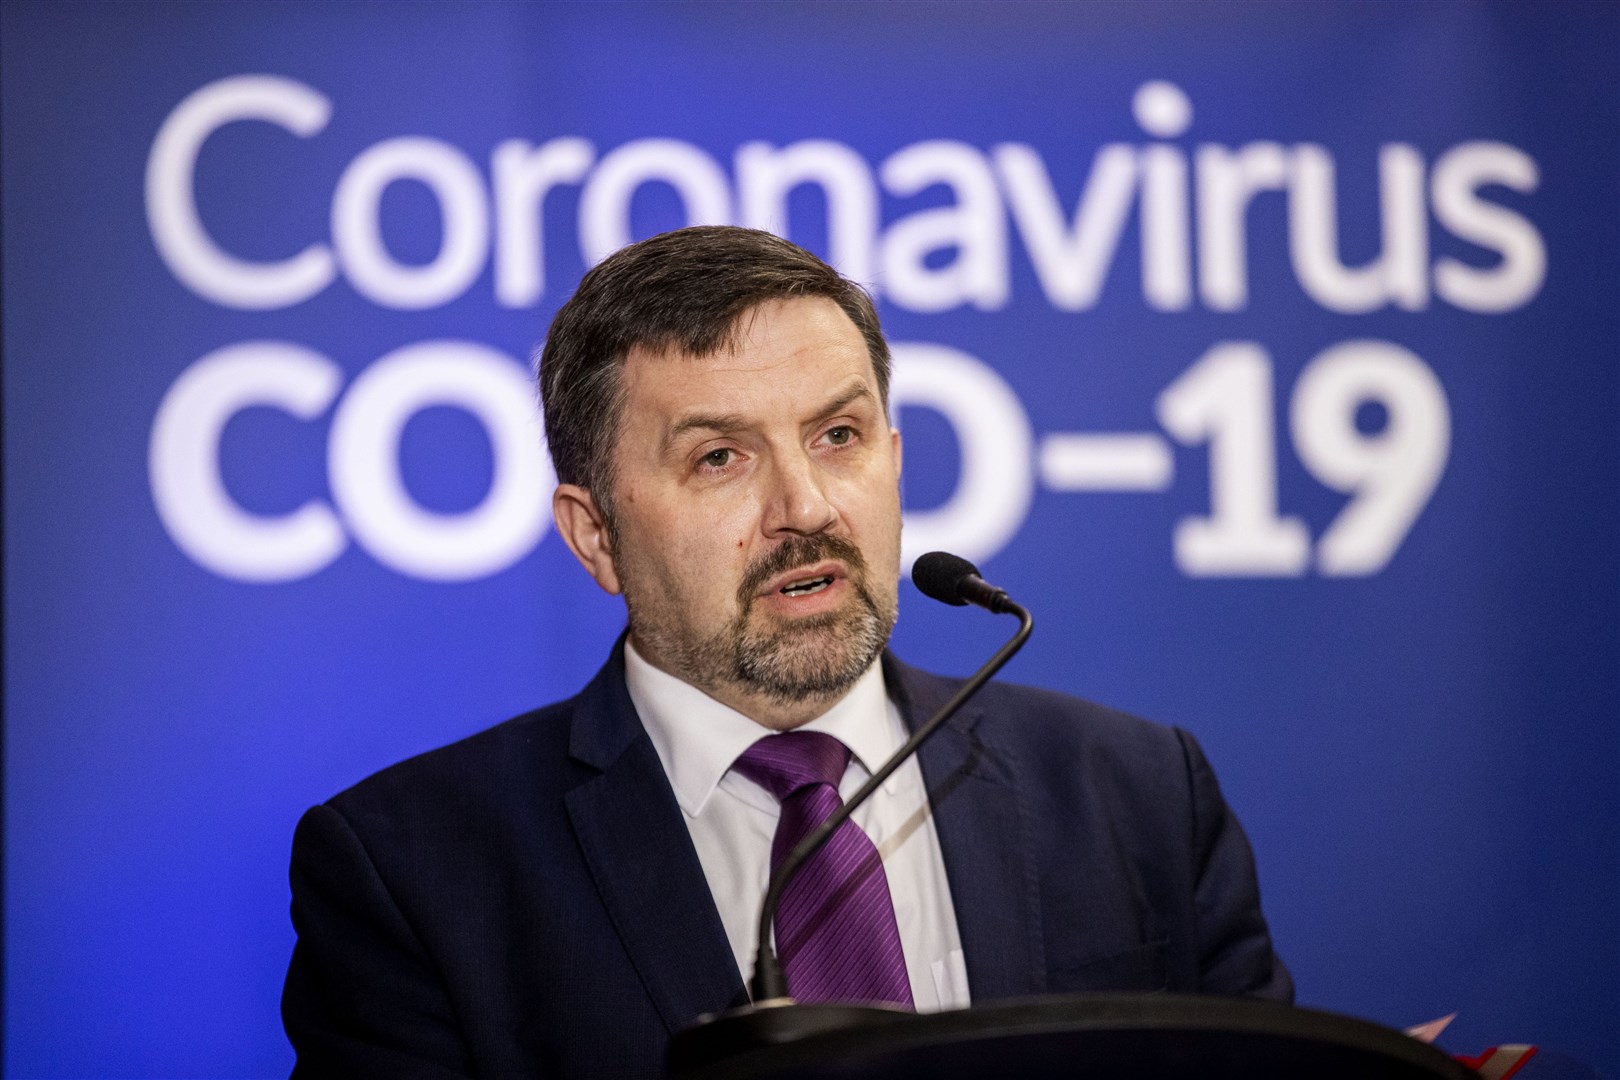 Health Minister Robin Swann during a daily press update on the response to the Covid-19 crisis in 2020 (PA)